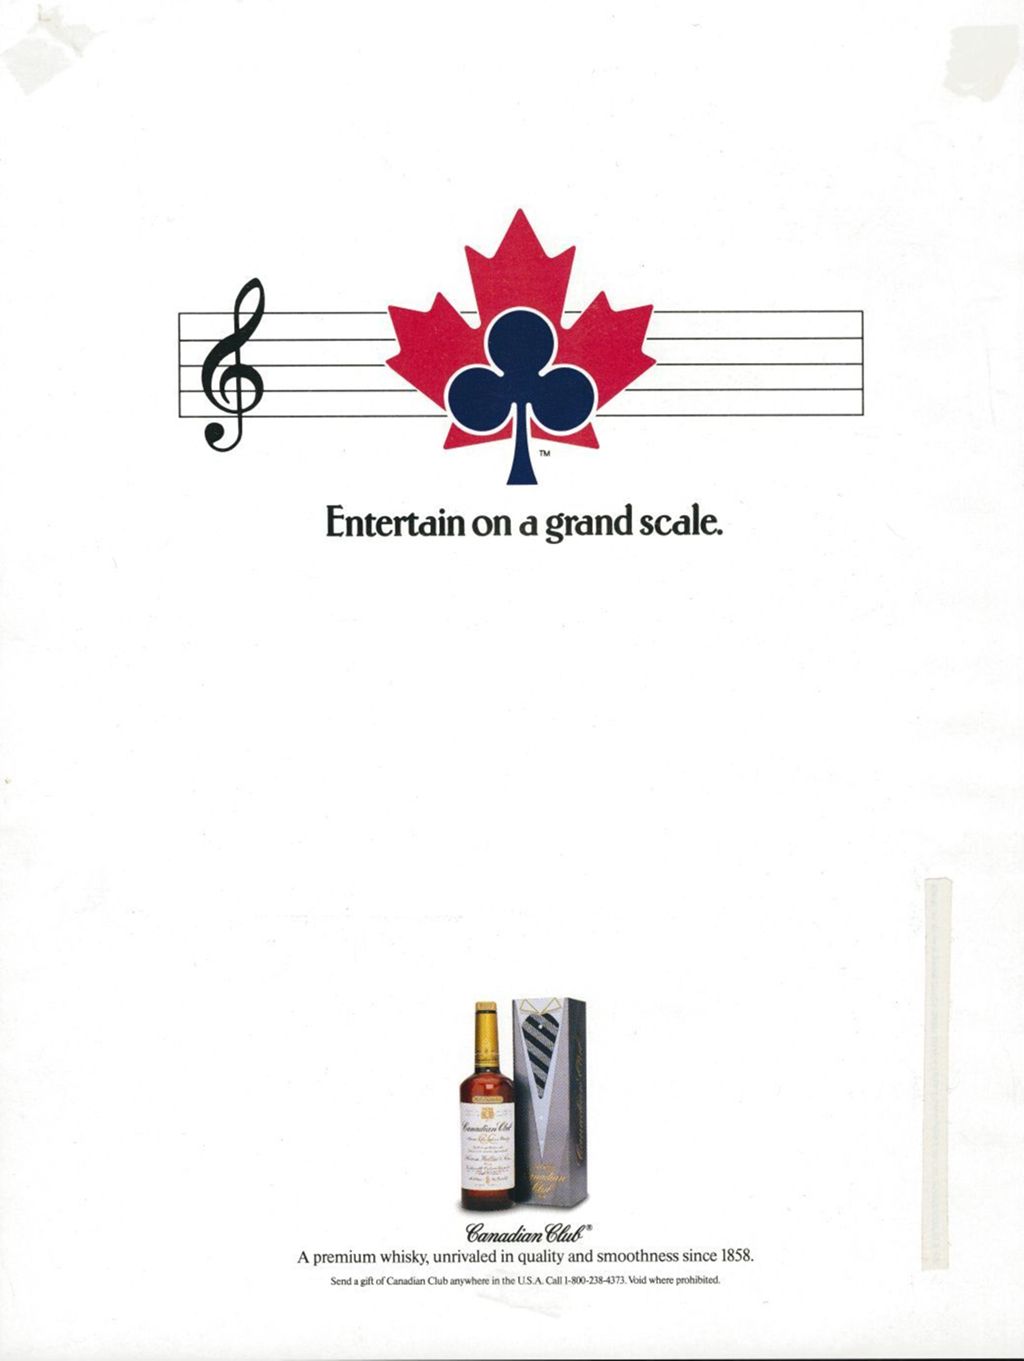 Entertain on a Grand Scale; Canadian Club whiskey advertisement